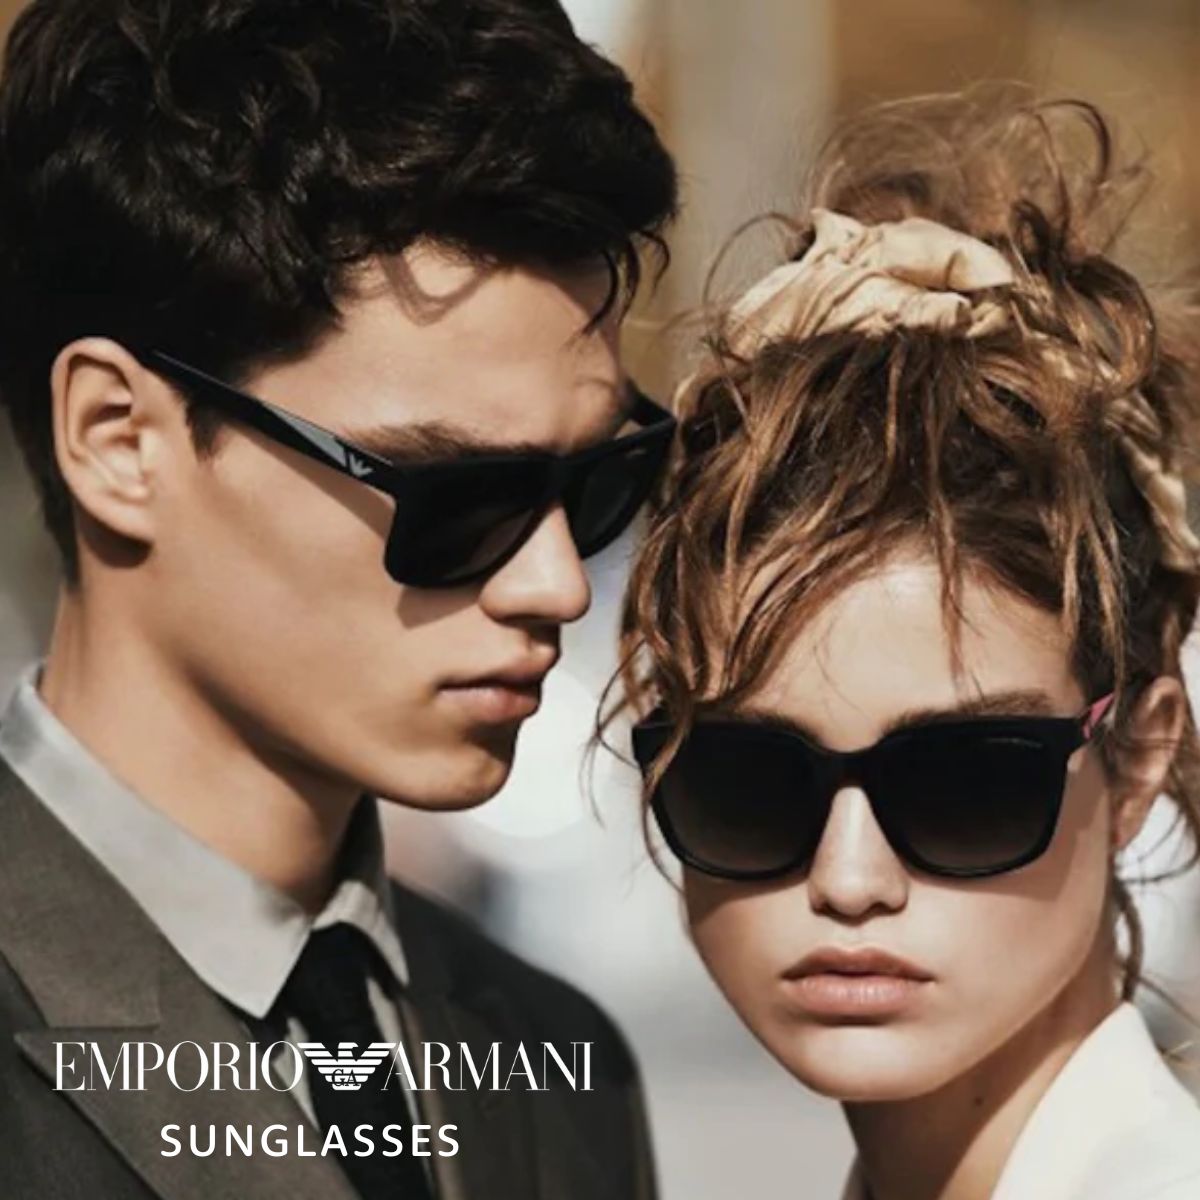 "Emporio Armani sunglasses collection at Optorium: Explore luxury eyewear with easy refunds and returns. Upgrade your style today."